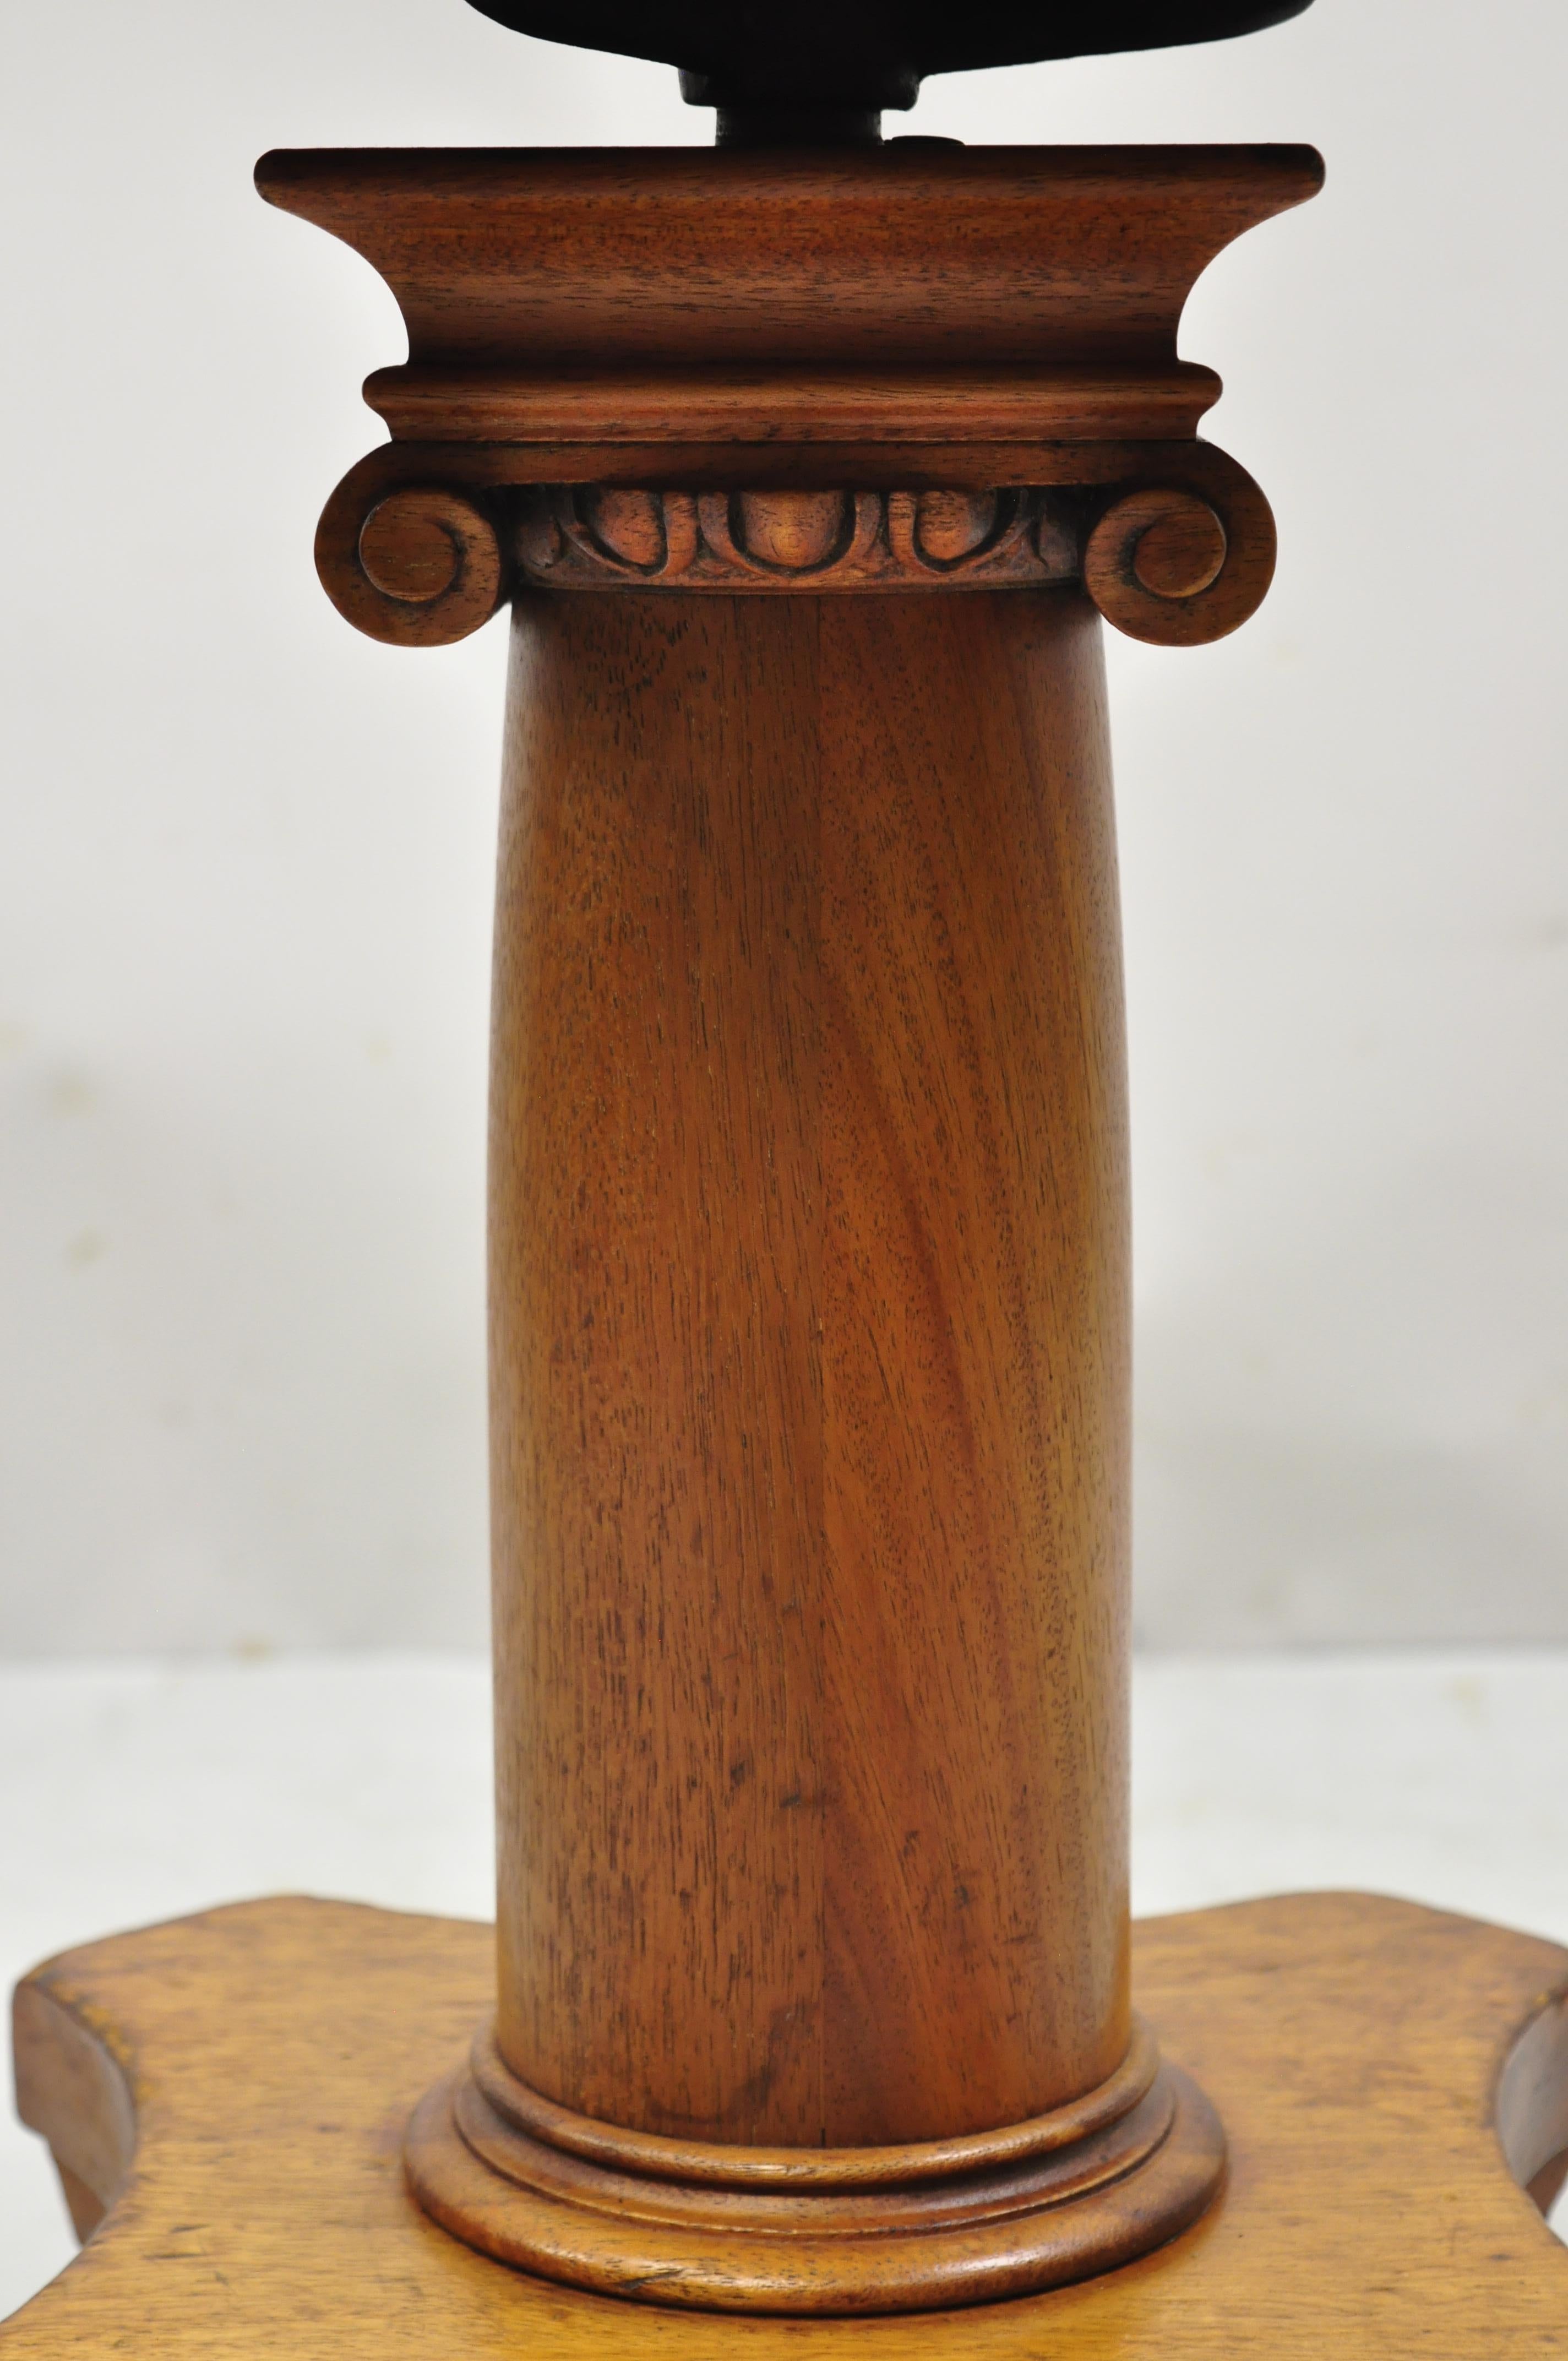 19th Century 19th C. American Empire Mahogany Carved Column Paw Feet Swivel Leather Stool For Sale